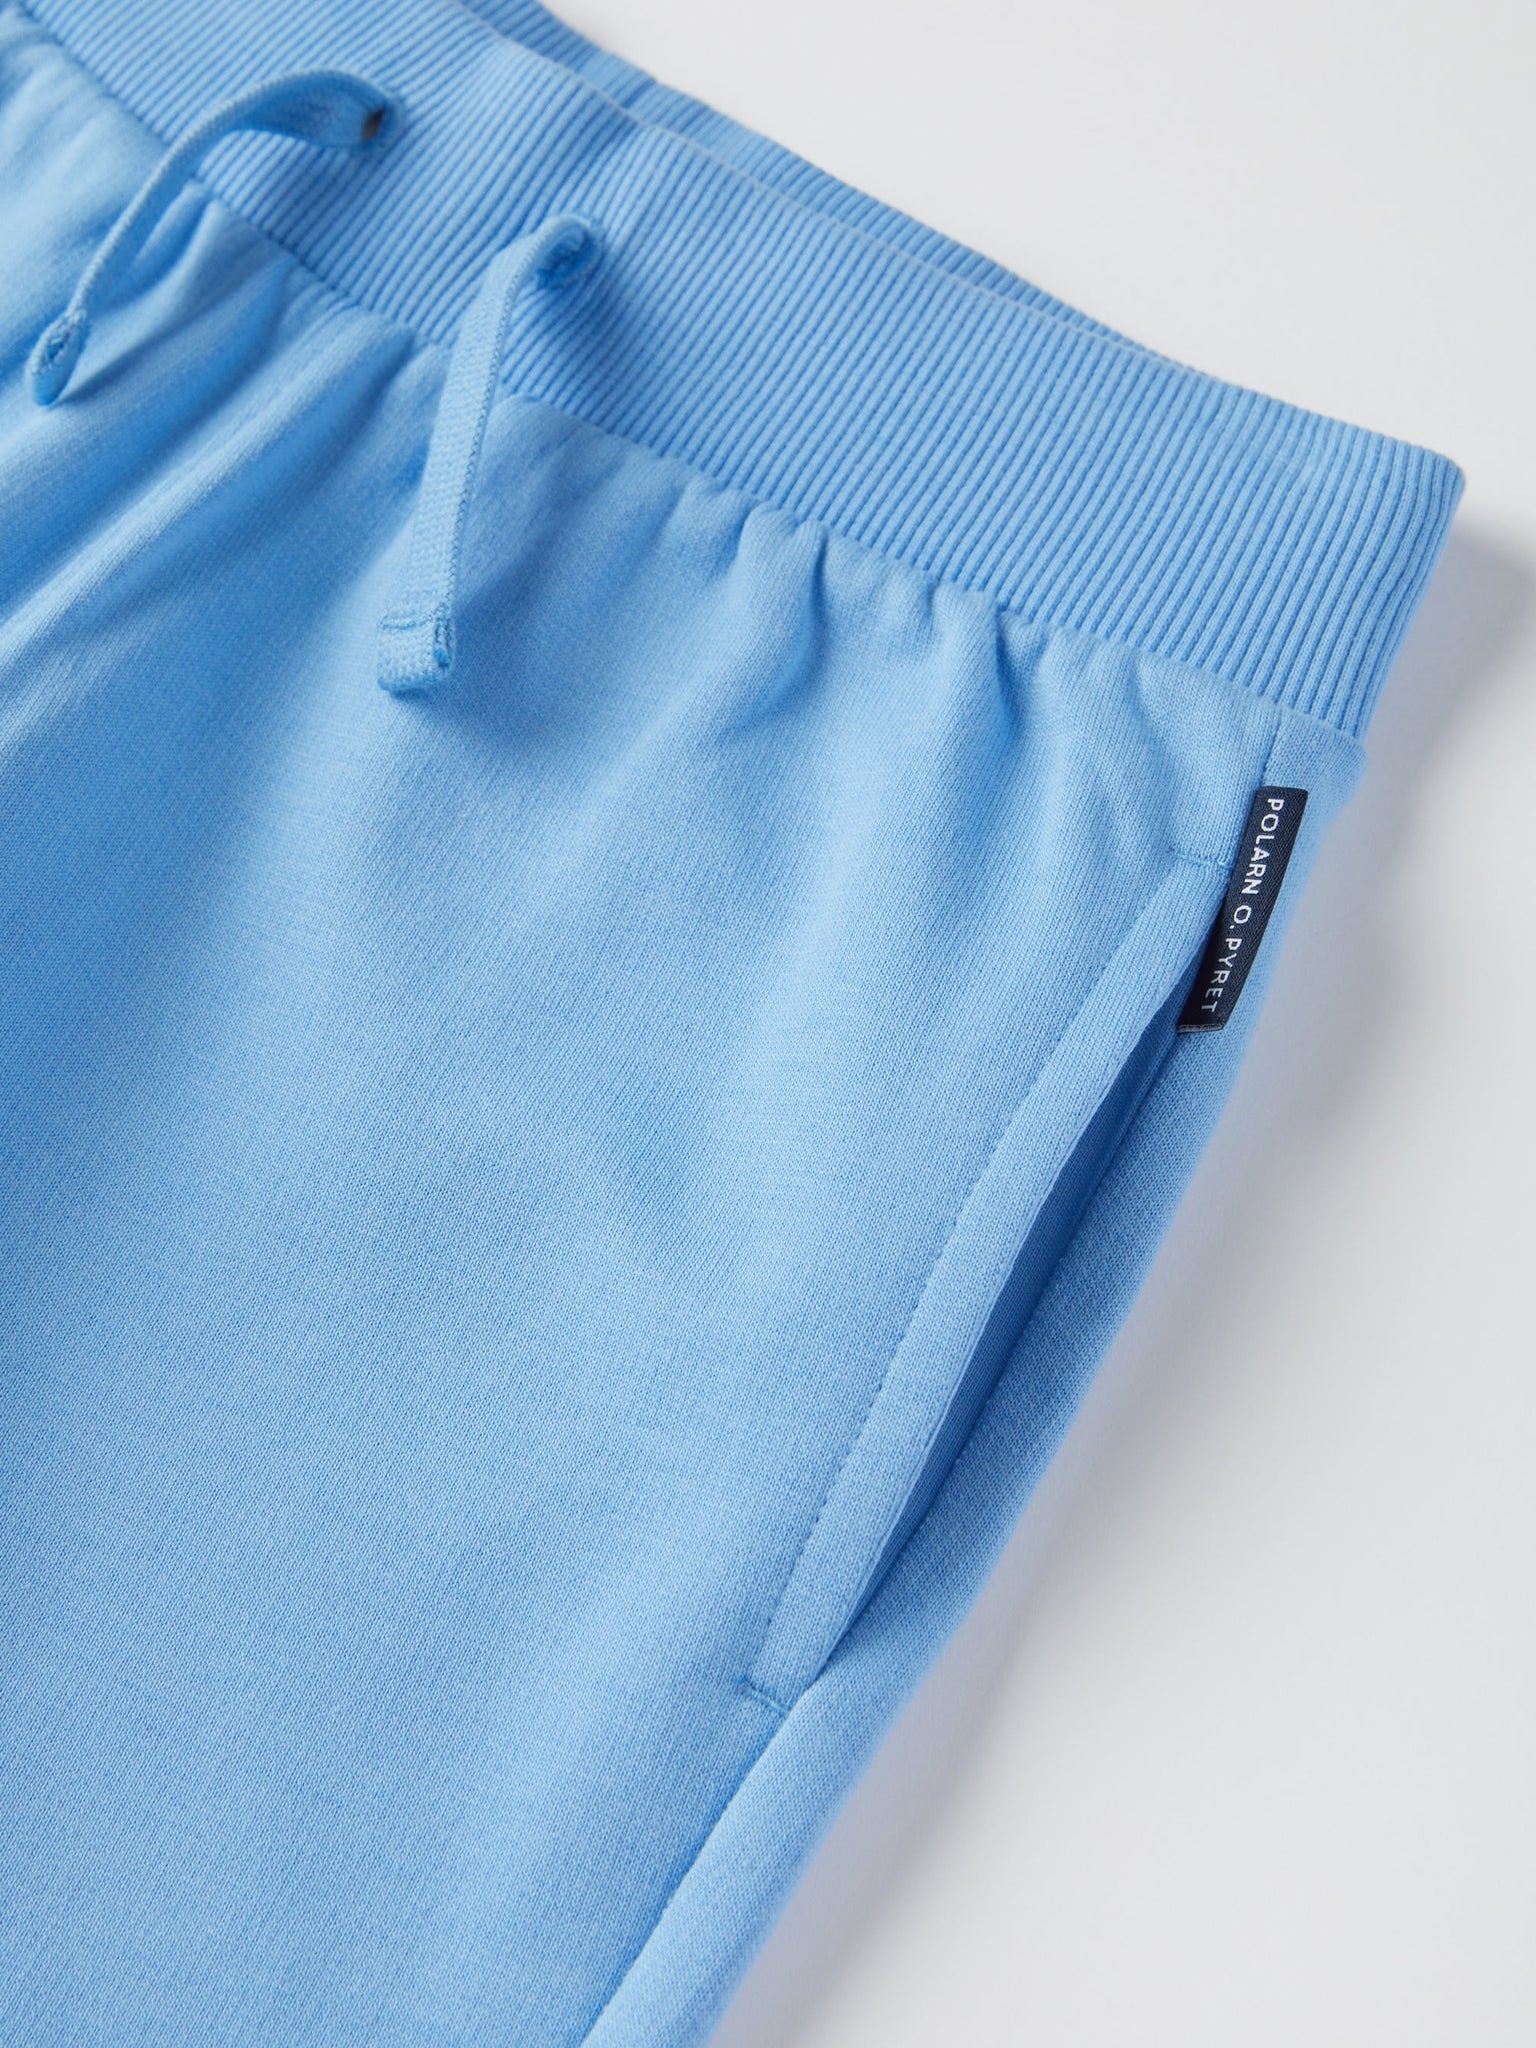 Blue Kids Jersey Shorts from the Polarn O. Pyret kidswear collection. Nordic kids clothes made from sustainable sources.